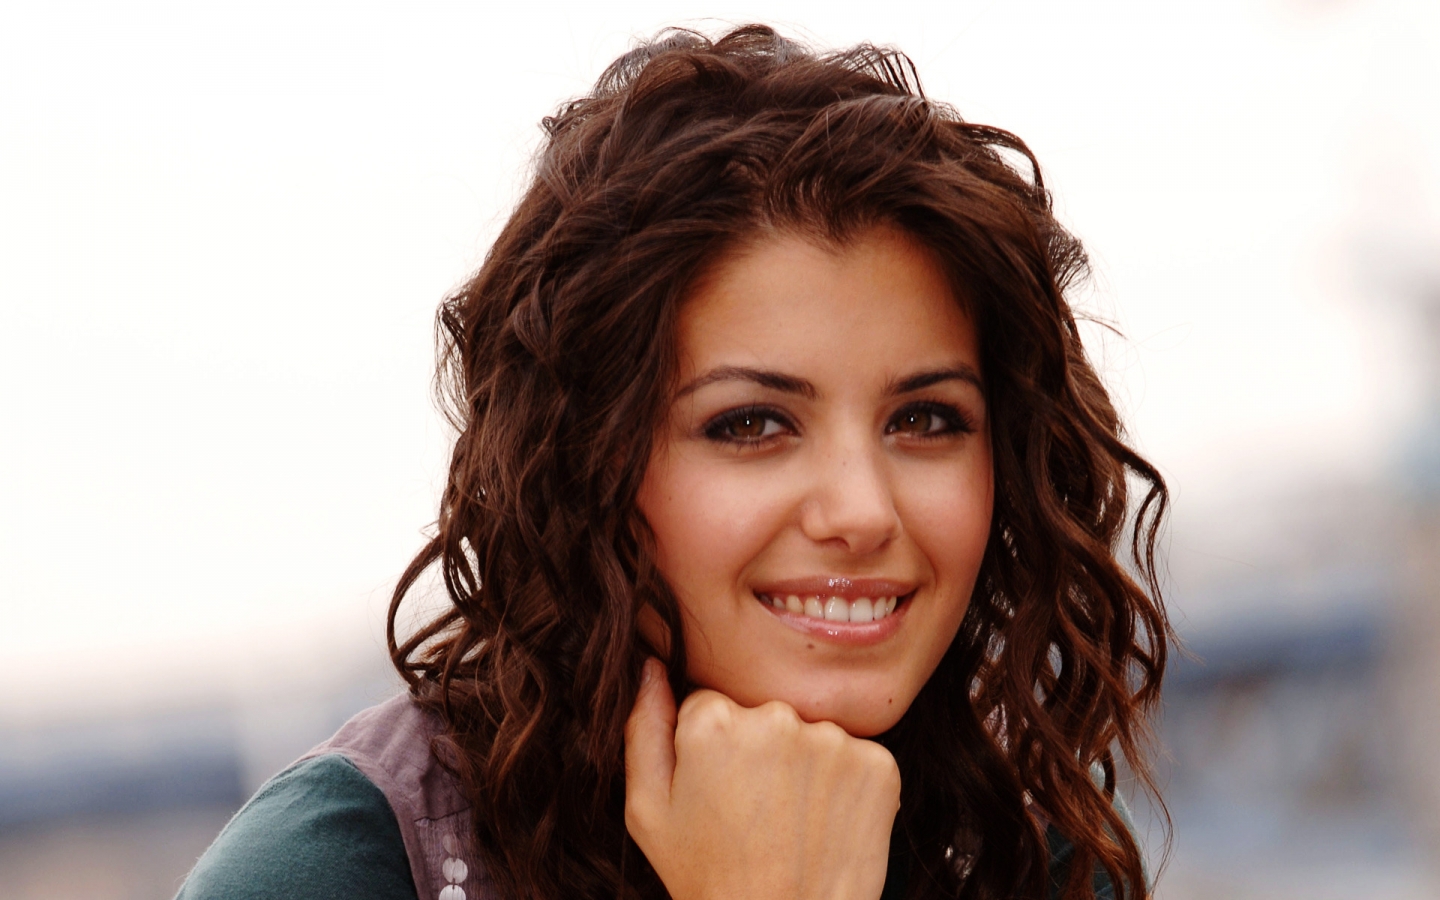 Katie Melua Smile for 1440 x 900 widescreen resolution